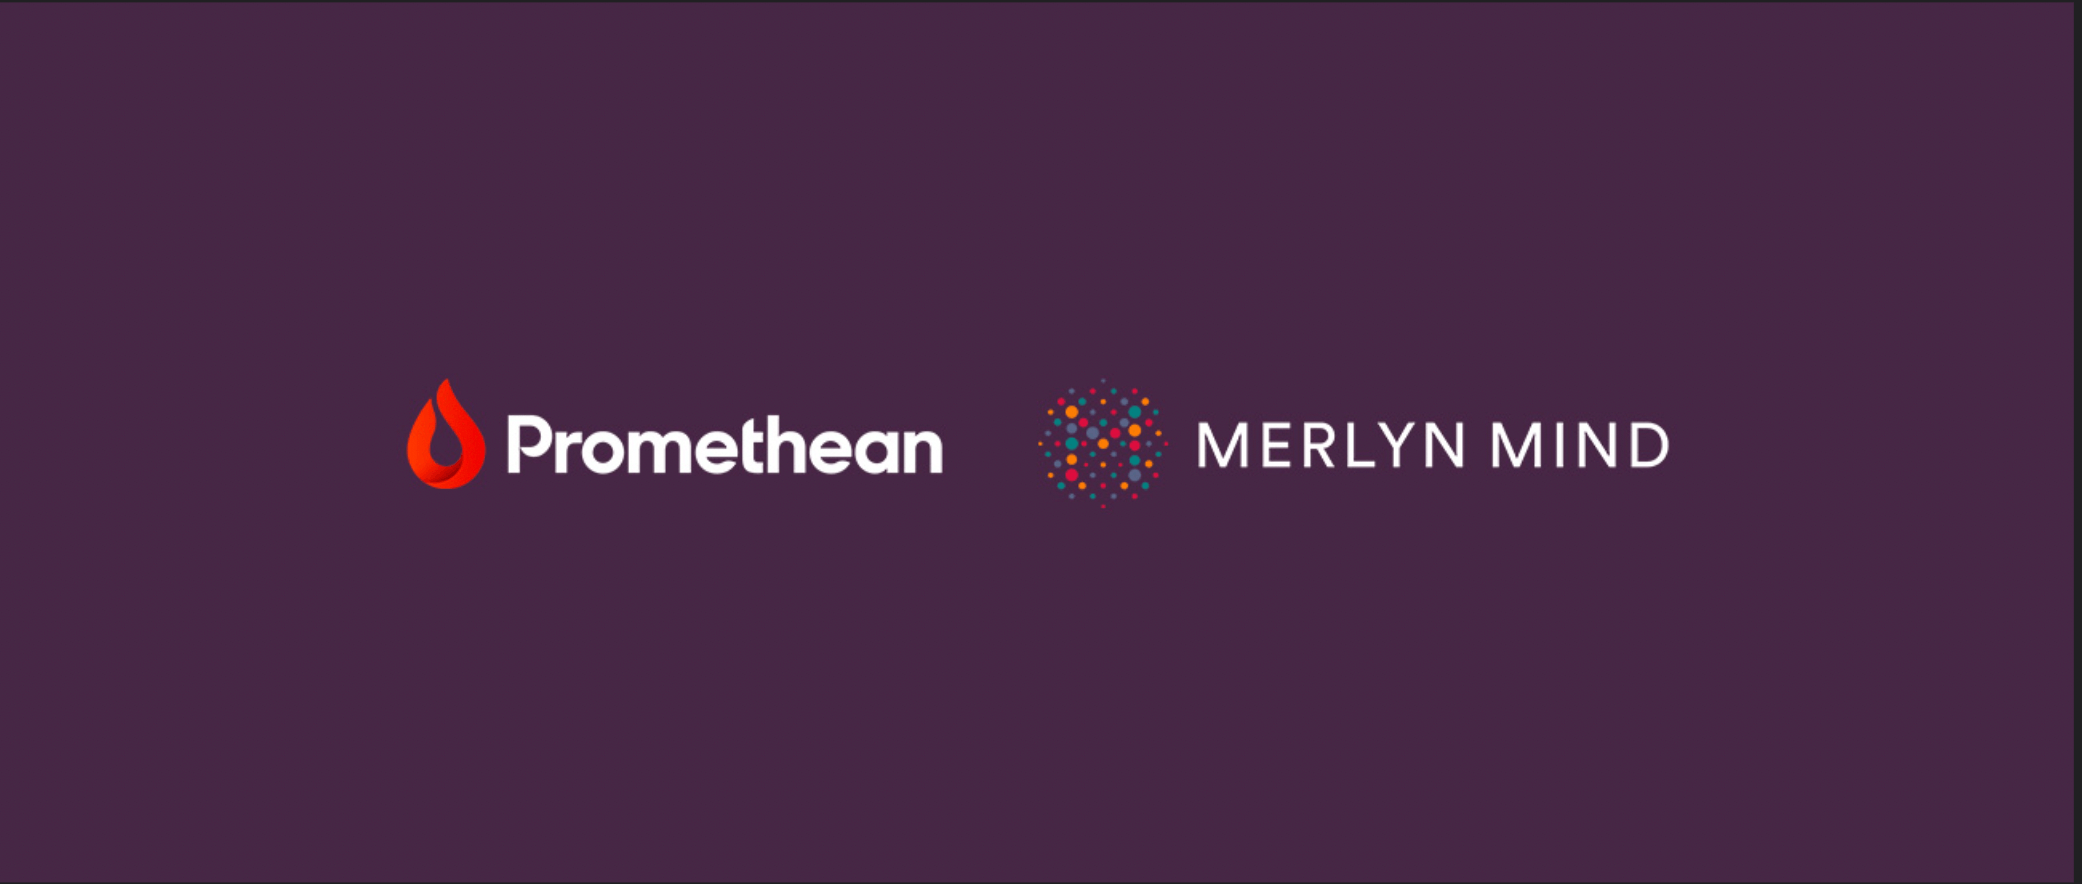 Promethean works with Merlyn Mind to increase classroom productivity and support innovative teaching